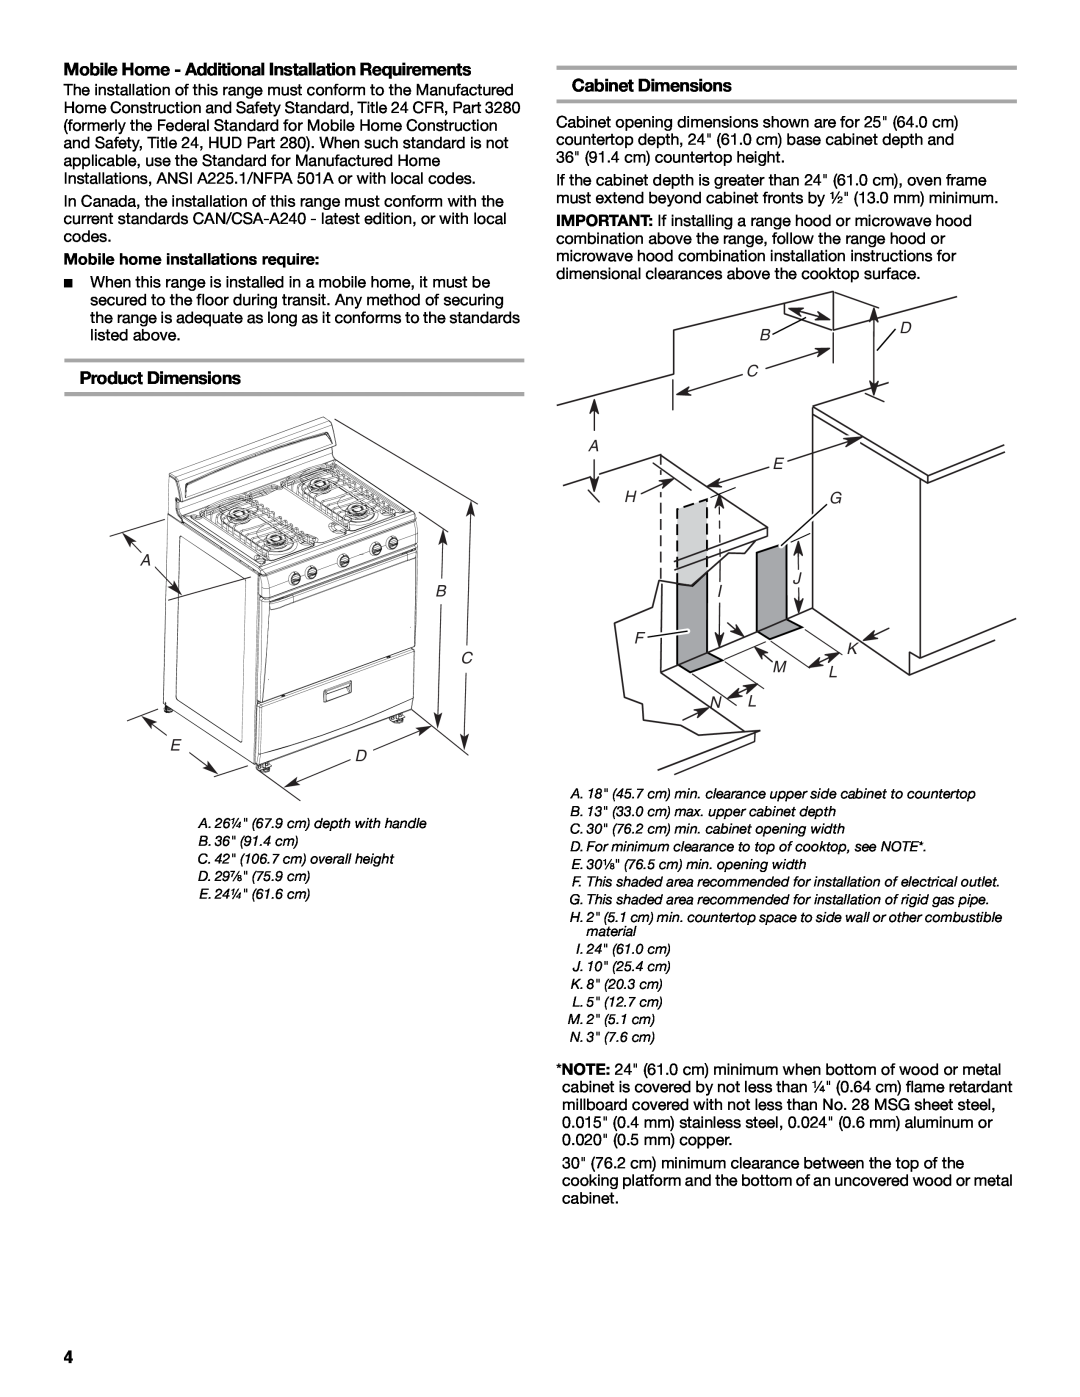 Amana W10130752B Product Dimensions, Cabinet Dimensions, Mobile home installations require, B D C A E H G, B C D, F K M L 